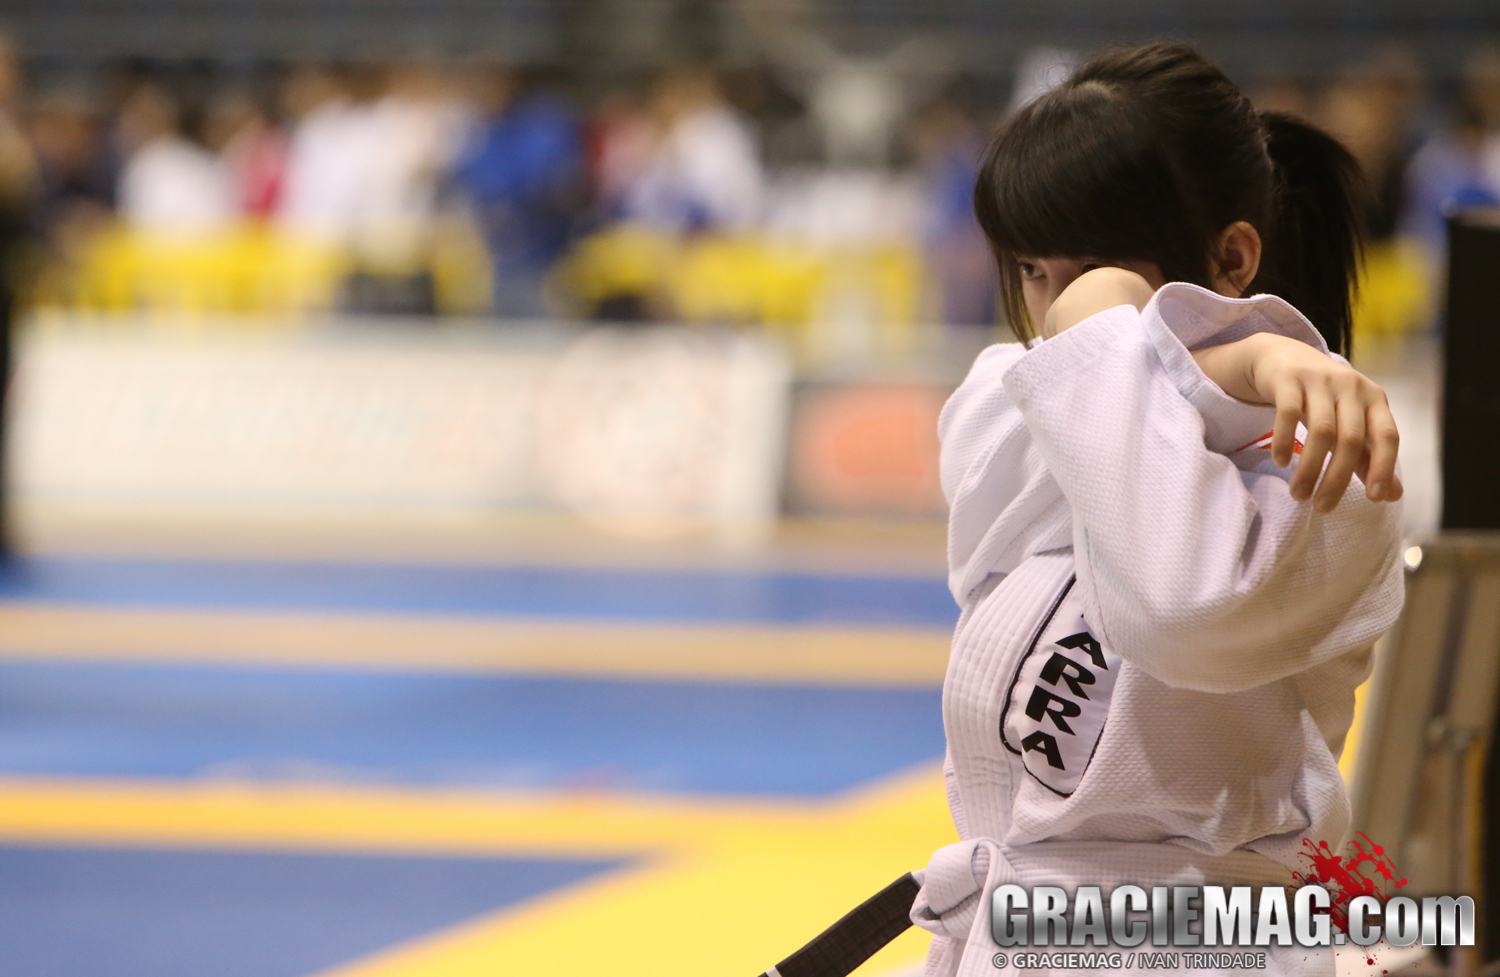 2013 Pan Day 1 was all about the white belts